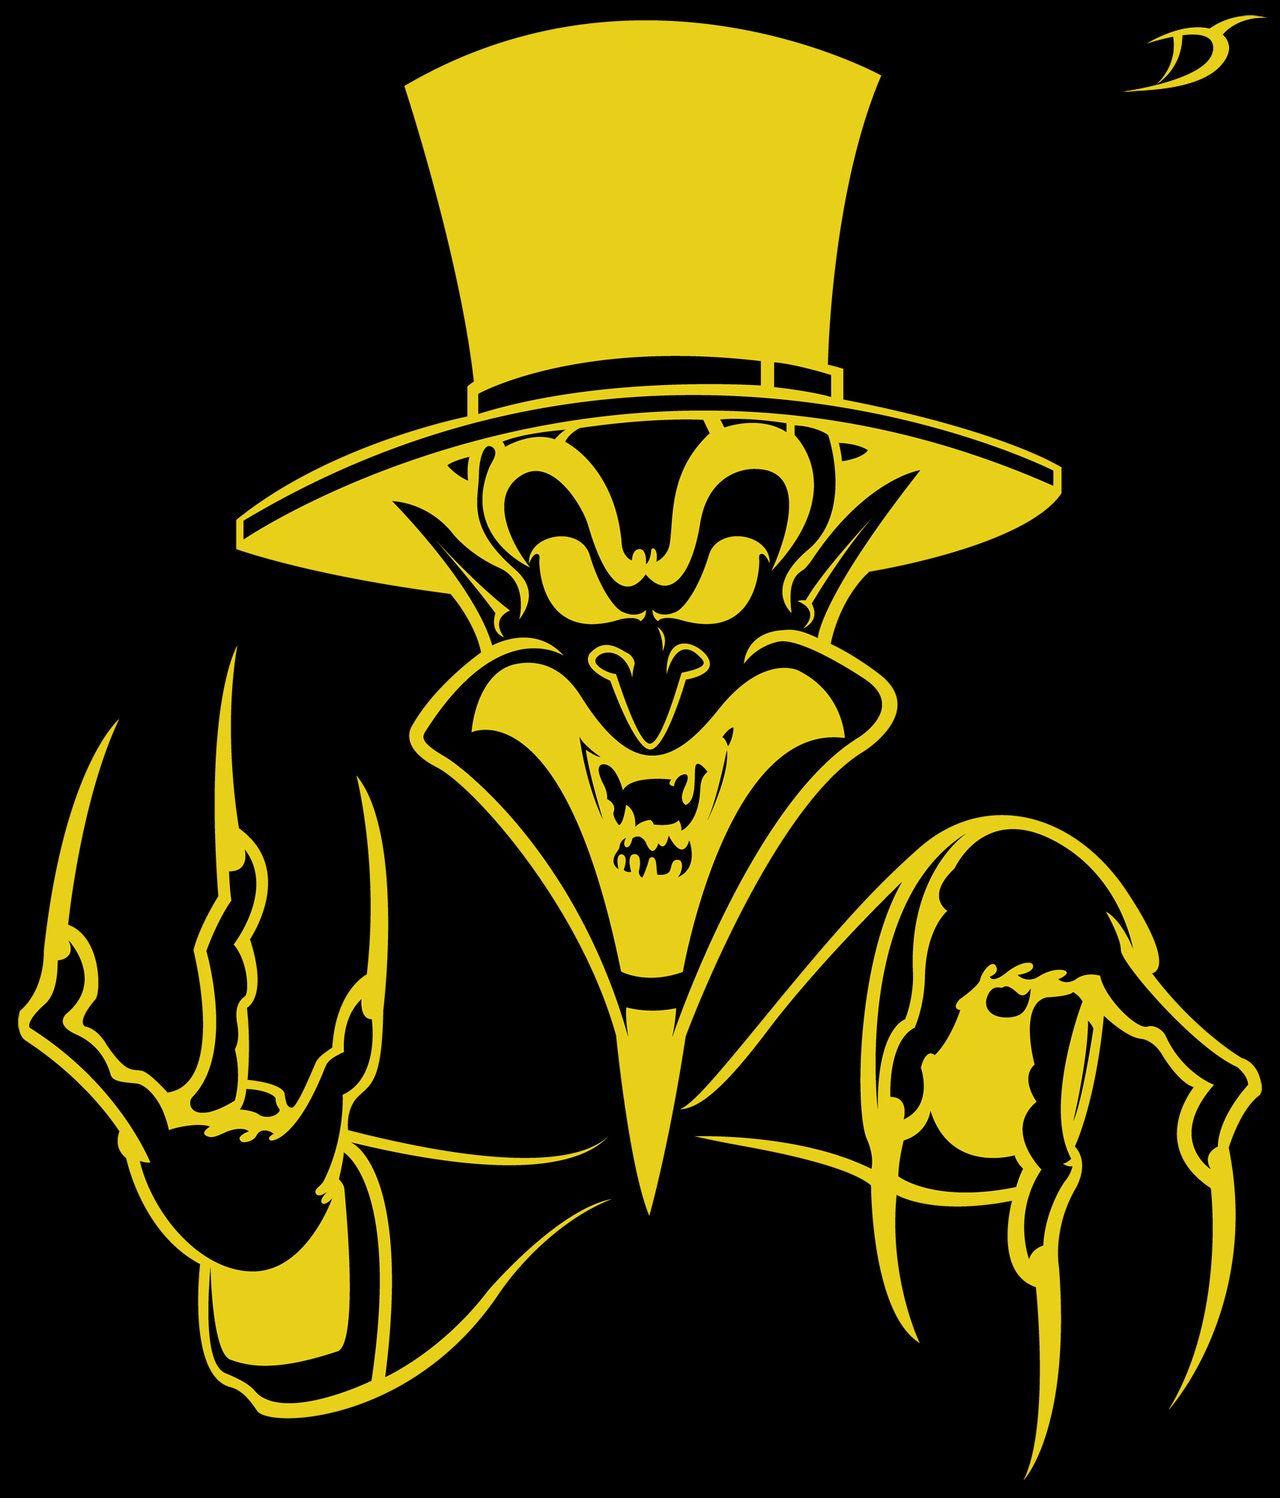 Free Icp Wallpapers Res 1280x1498PX ~ Wallpapers Icp